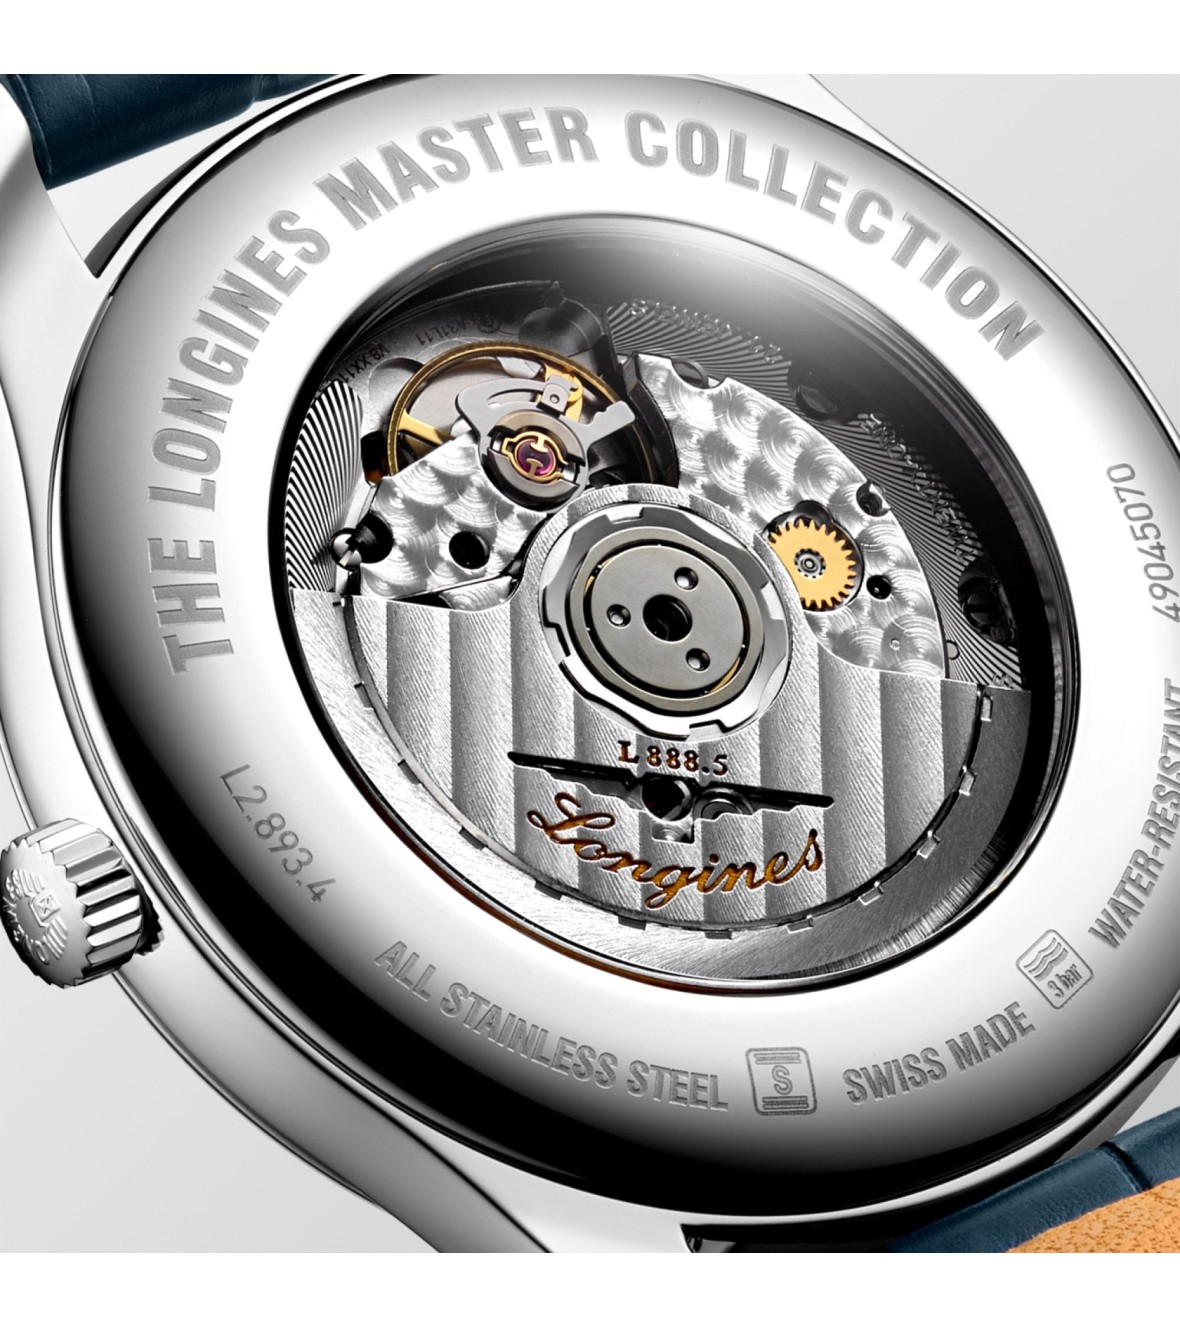 The Longines Master Collection L2.893.4.79.2